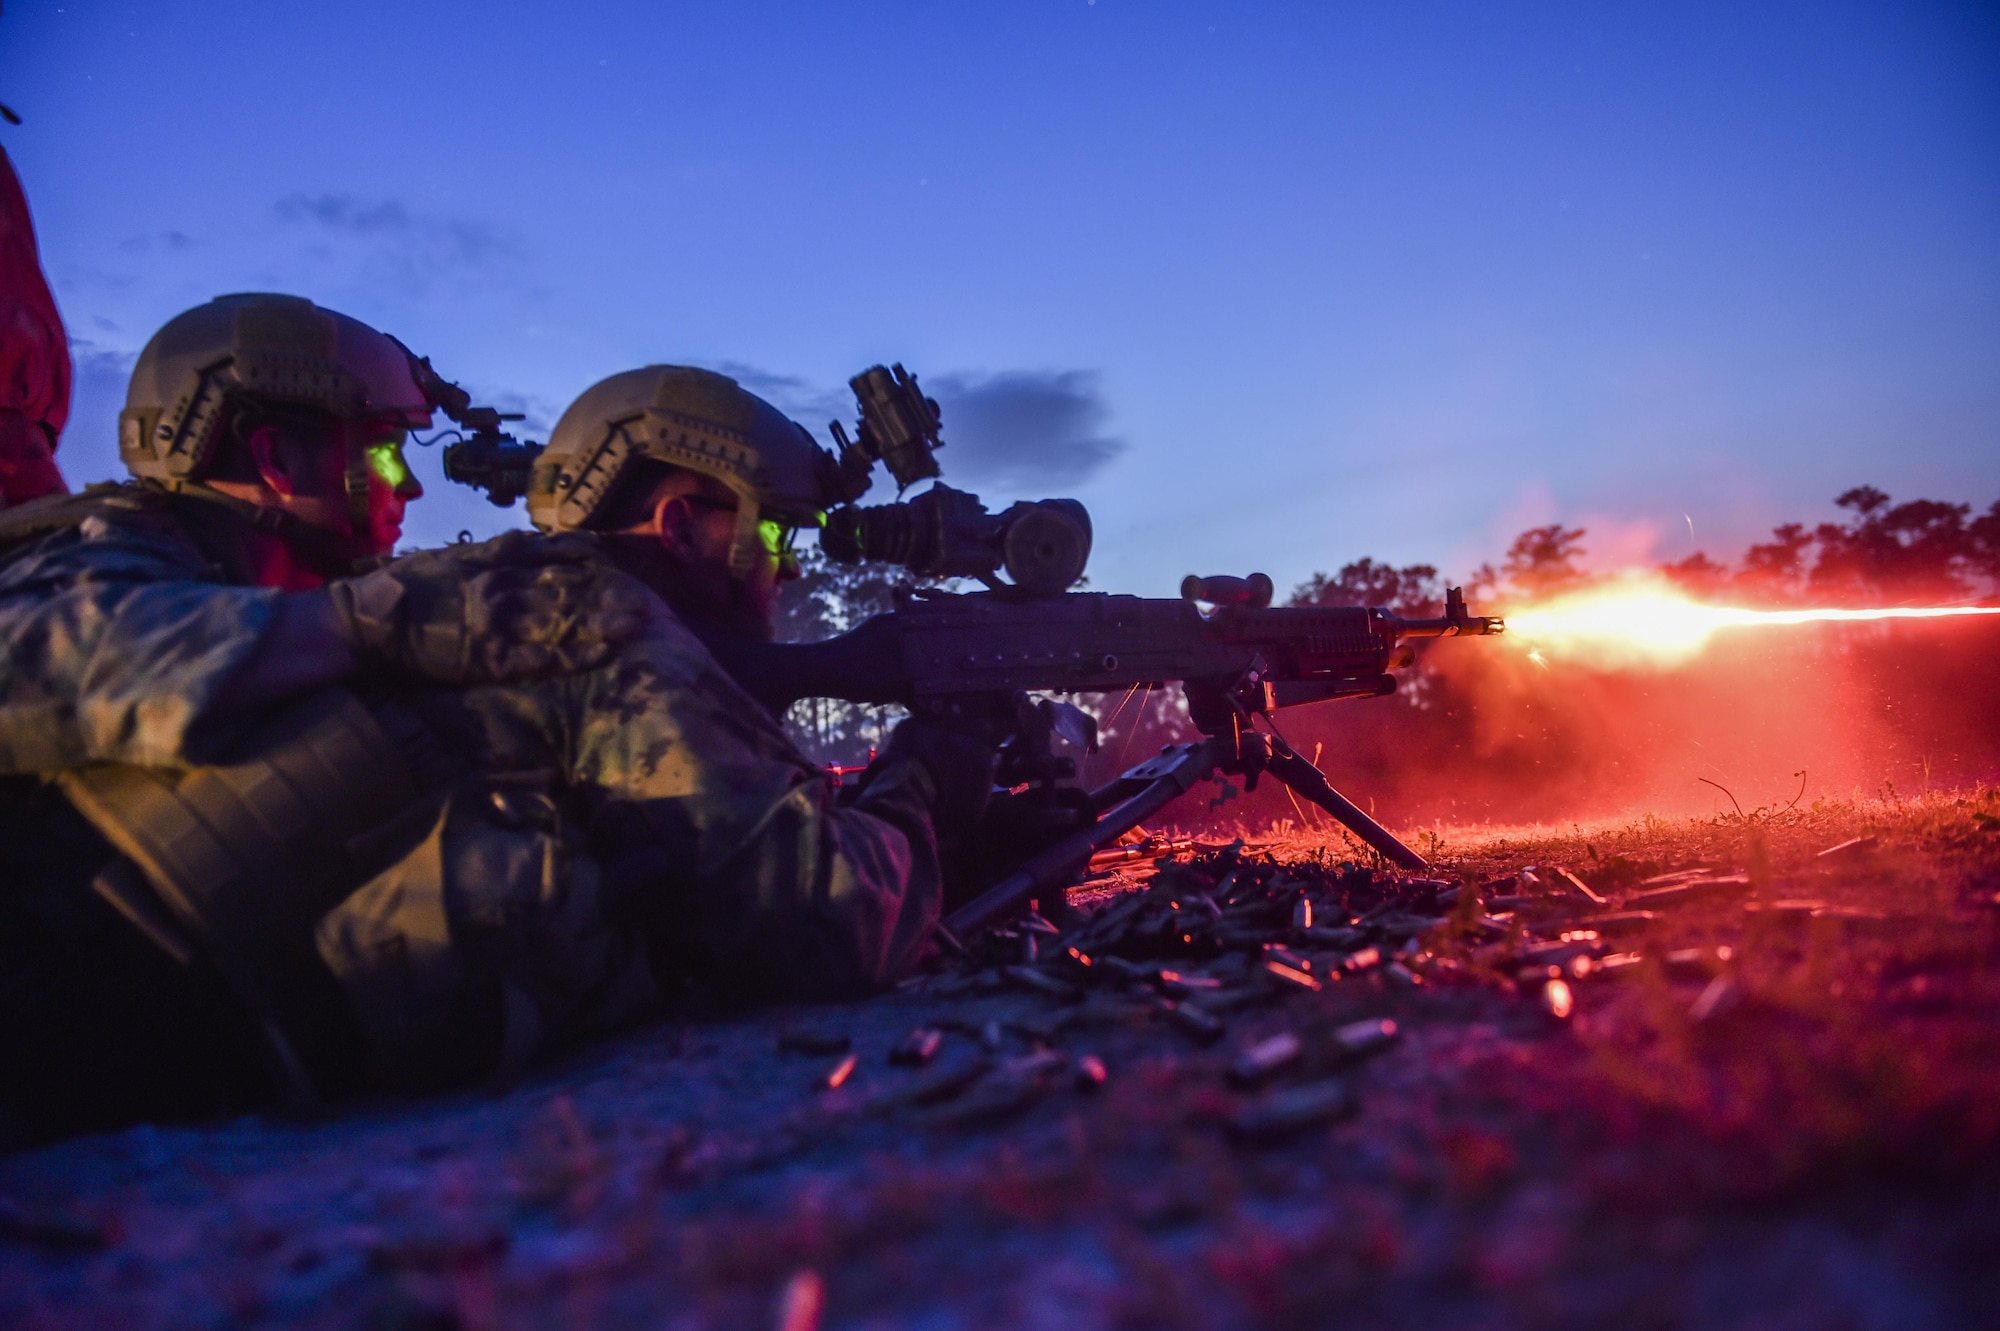 Marine Special Operations School Individual Training Course students fire an M249 squad automatic weapon during night-fire training April 13, 2017, at Camp Lejeune. For the first time, U.S. Air Force Special Tactics Airmen spent three months in Marine Special Operations Command’s Marine Raider training pipeline, representing efforts to build joint mindsets across special operations forces.  (U.S. Air Force photo by Senior Airman Ryan Conroy)